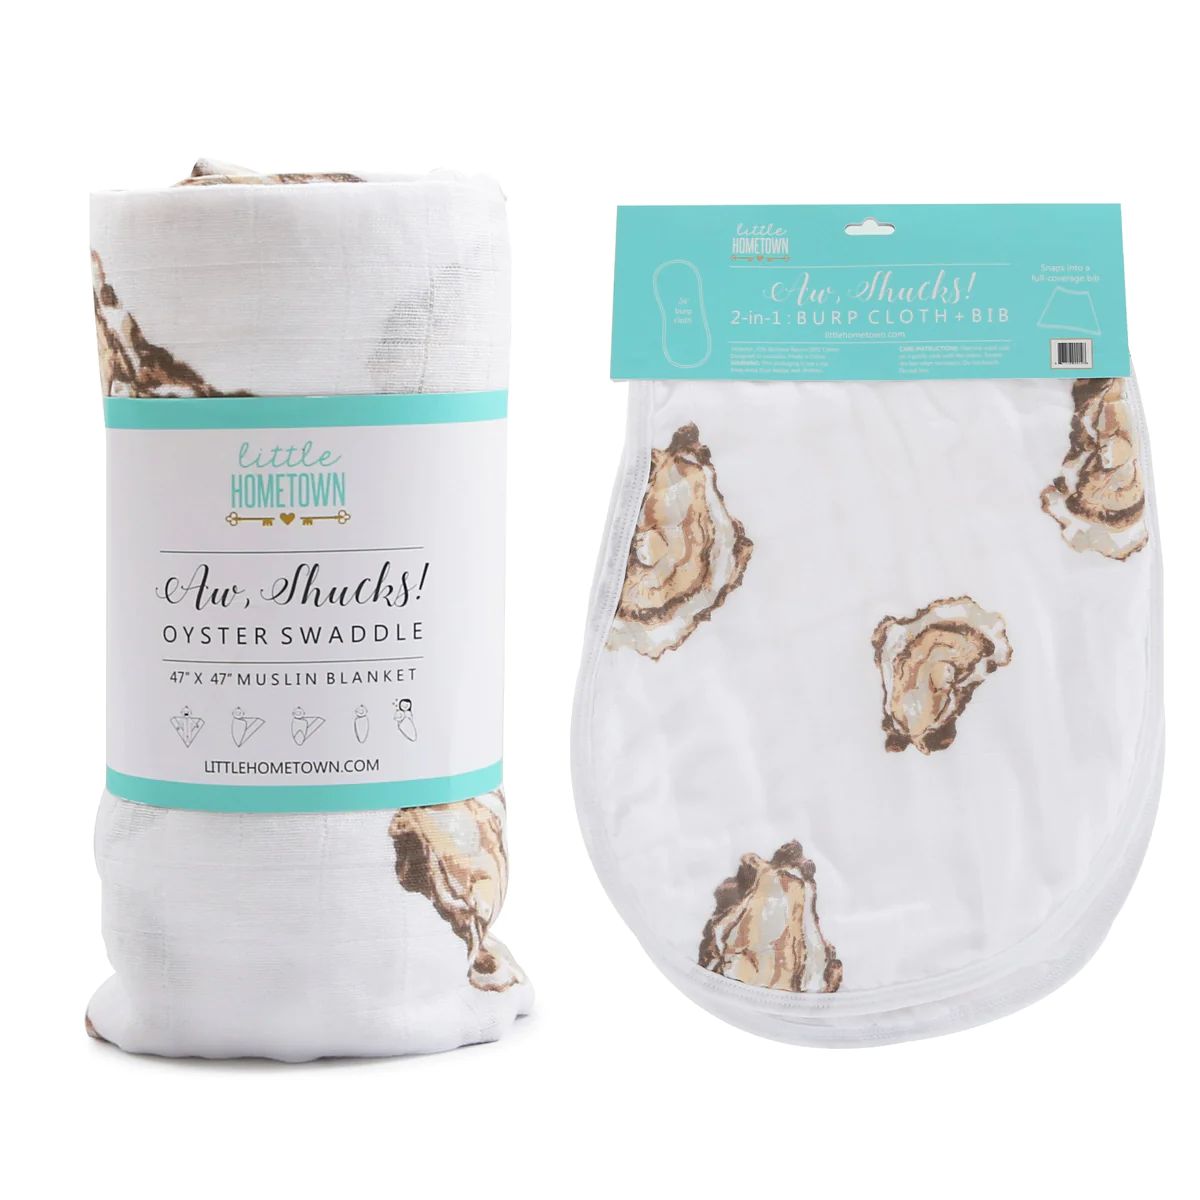 Gift Set: Aw Shucks! Oyster Baby Muslin Swaddle Blanket and Burp Cloth/Bib Combo | Little Hometown